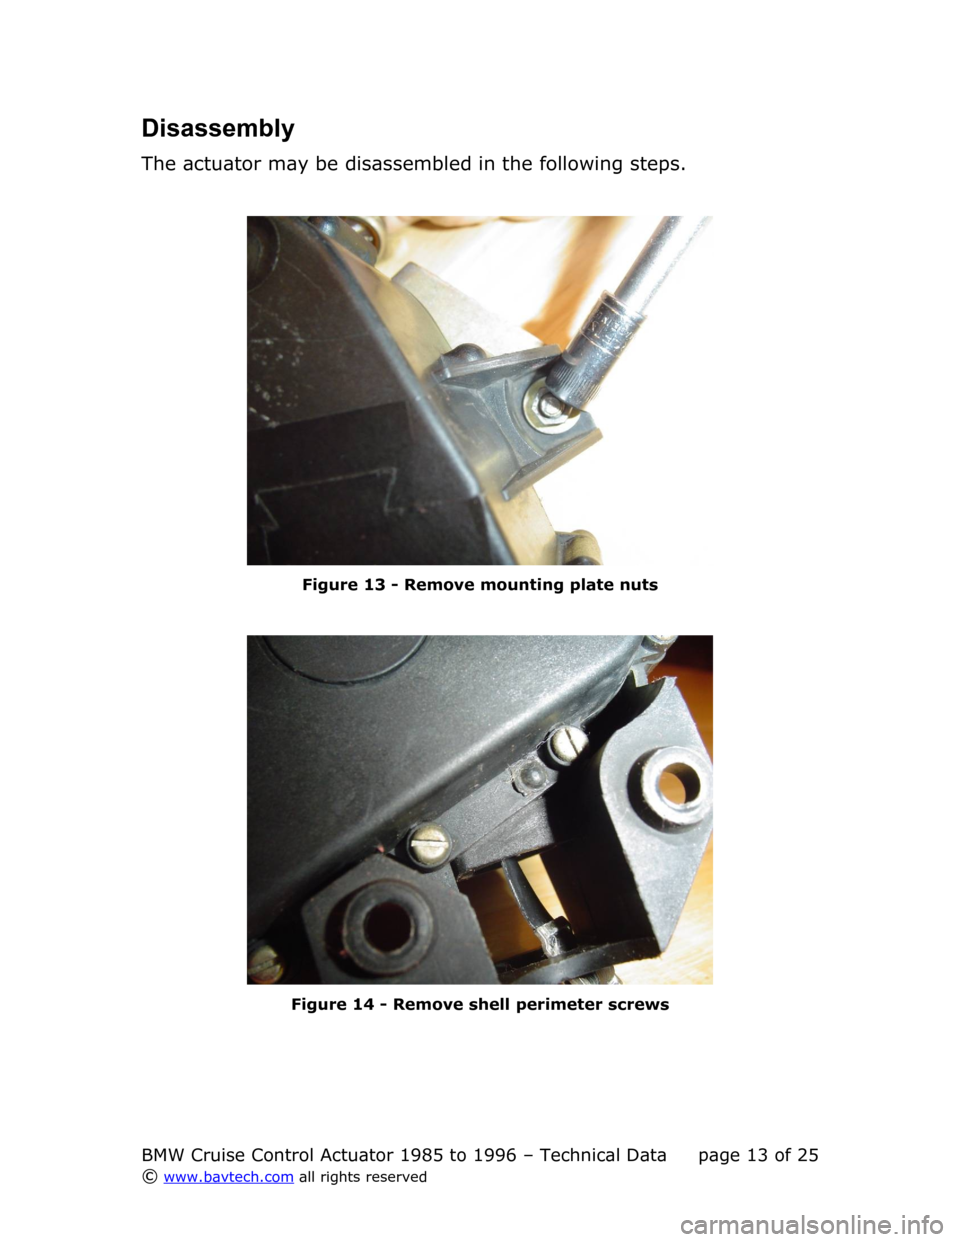 BMW 3 SERIES 1994 E36 Cruise Control Acutator Disassembly
The actuator may be disassembled in the following steps.
Figure  13  - Remove mounting plate nuts
Figure  14  - Remove shell perimeter screws
BMW Cruise Control Actuator 1985 to 1996 – T